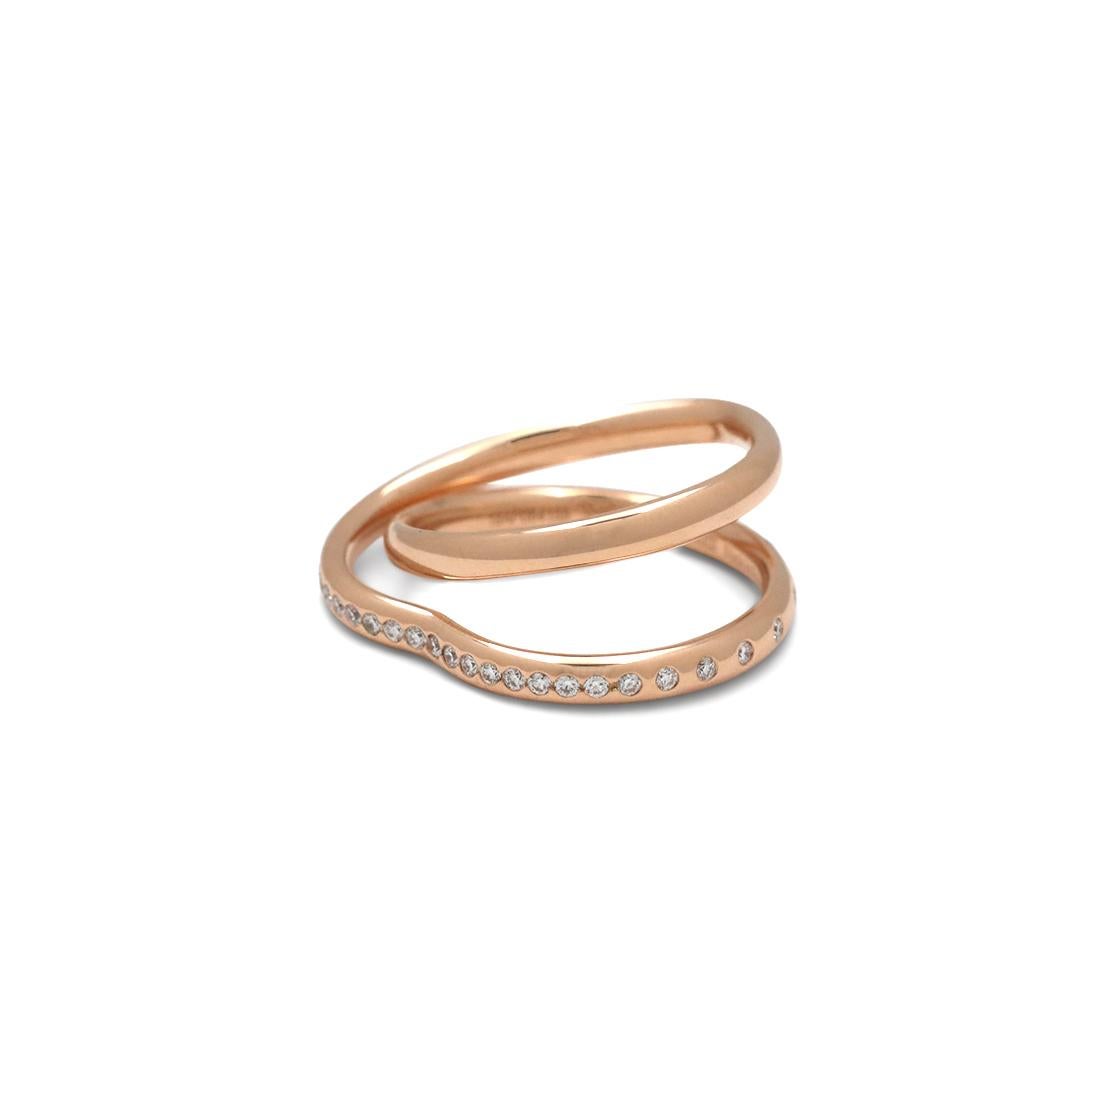 Authentic Hermes Vertige Coeur ring crafted in 18 karat rose gold and designed in the shape of a double ring. The second ring is heart-shaped and is set with round brilliant cut diamonds with an estimated total carat weight of 0.21. Signed Hermes,